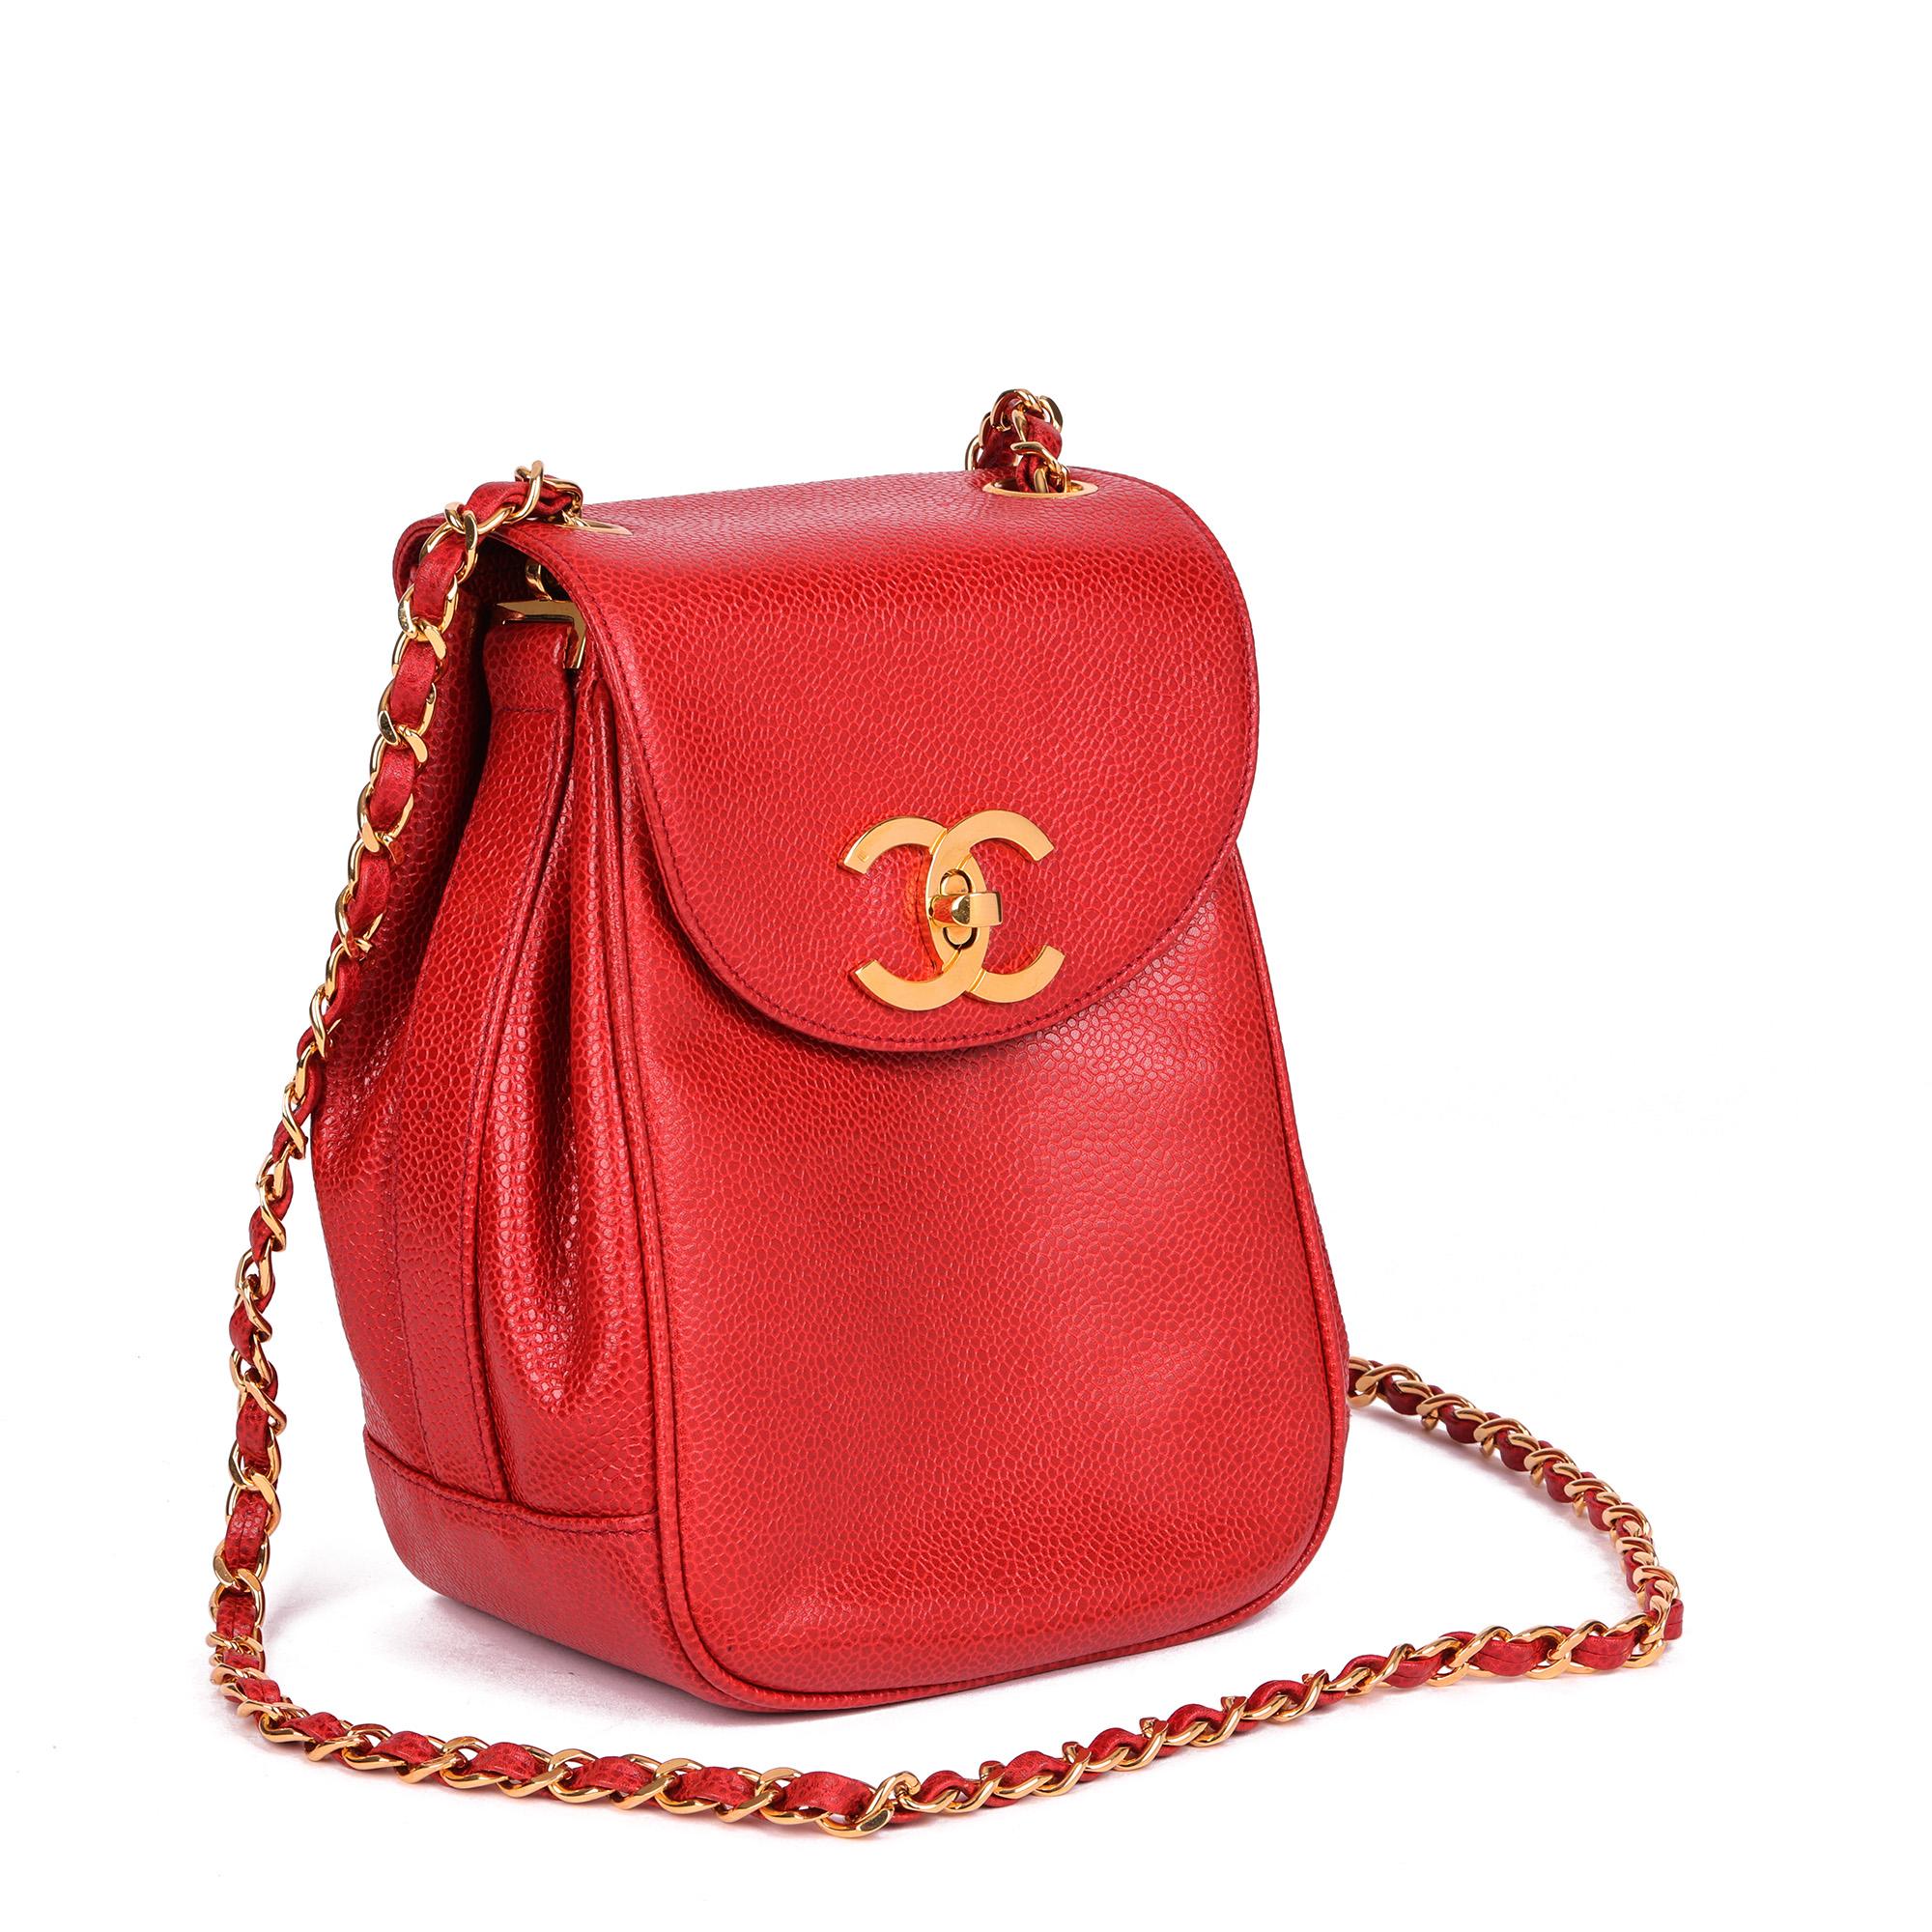 CHANEL
Red Caviar Leather Vintage XL Classic Single Flap Bag 

Serial Number: 3390577
Age (Circa): 1994
Accompanied By: Chanel Dust Bag, Authenticity Card
Authenticity Details: Authenticity Card, Serial Sticker (Made in Italy)
Gender: Ladies
Type: